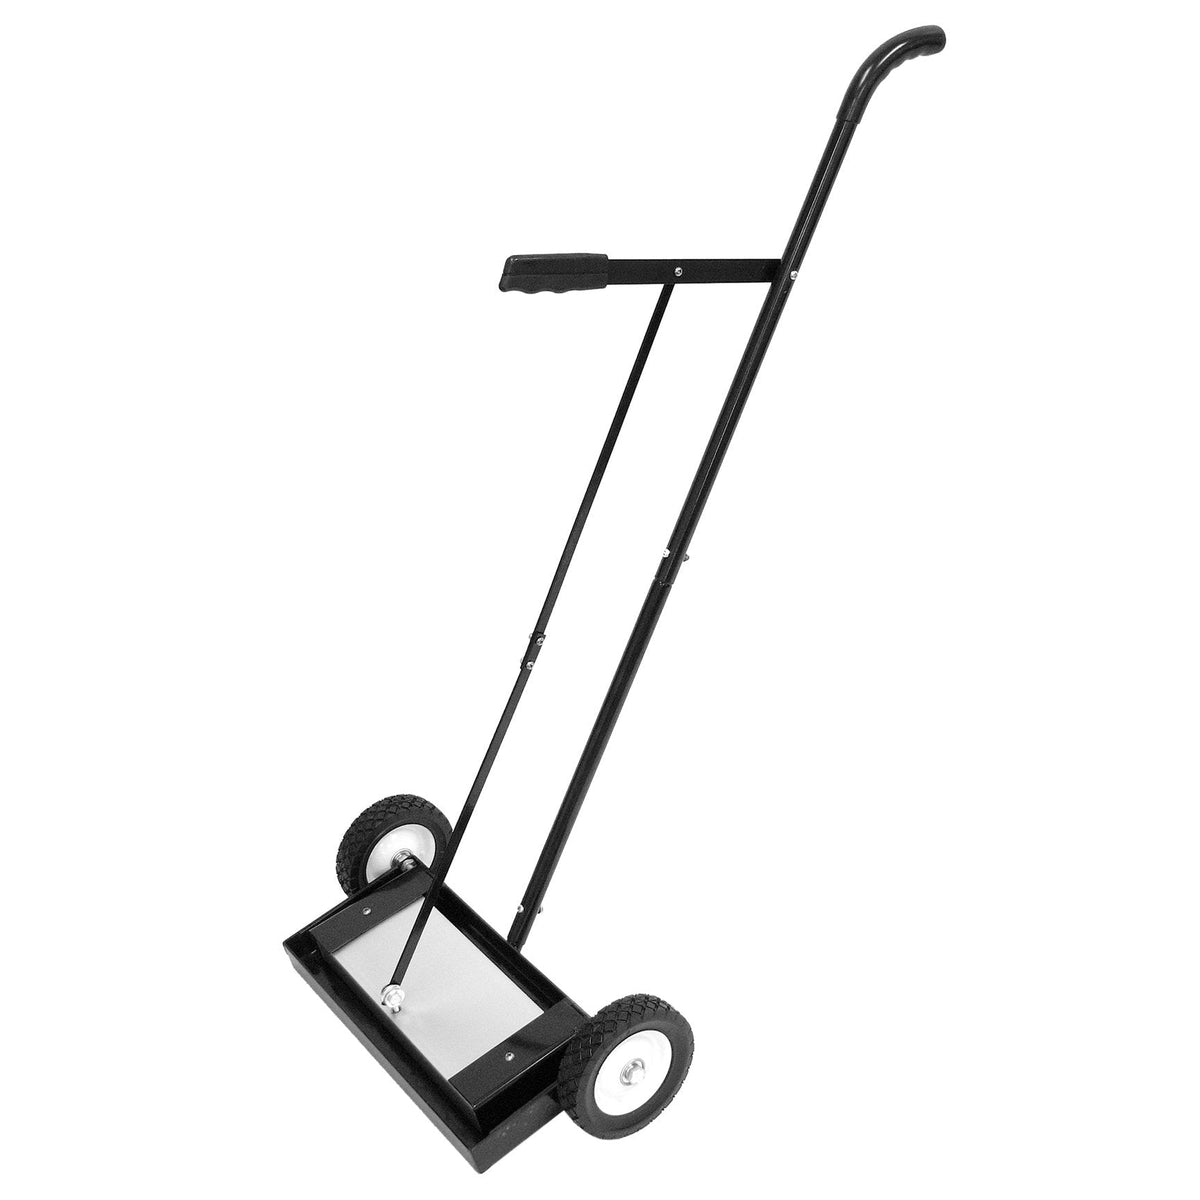 Magnet Sweeper Mini Push-Type New 1 each Free Shipping 14.5" Sweeping Width 